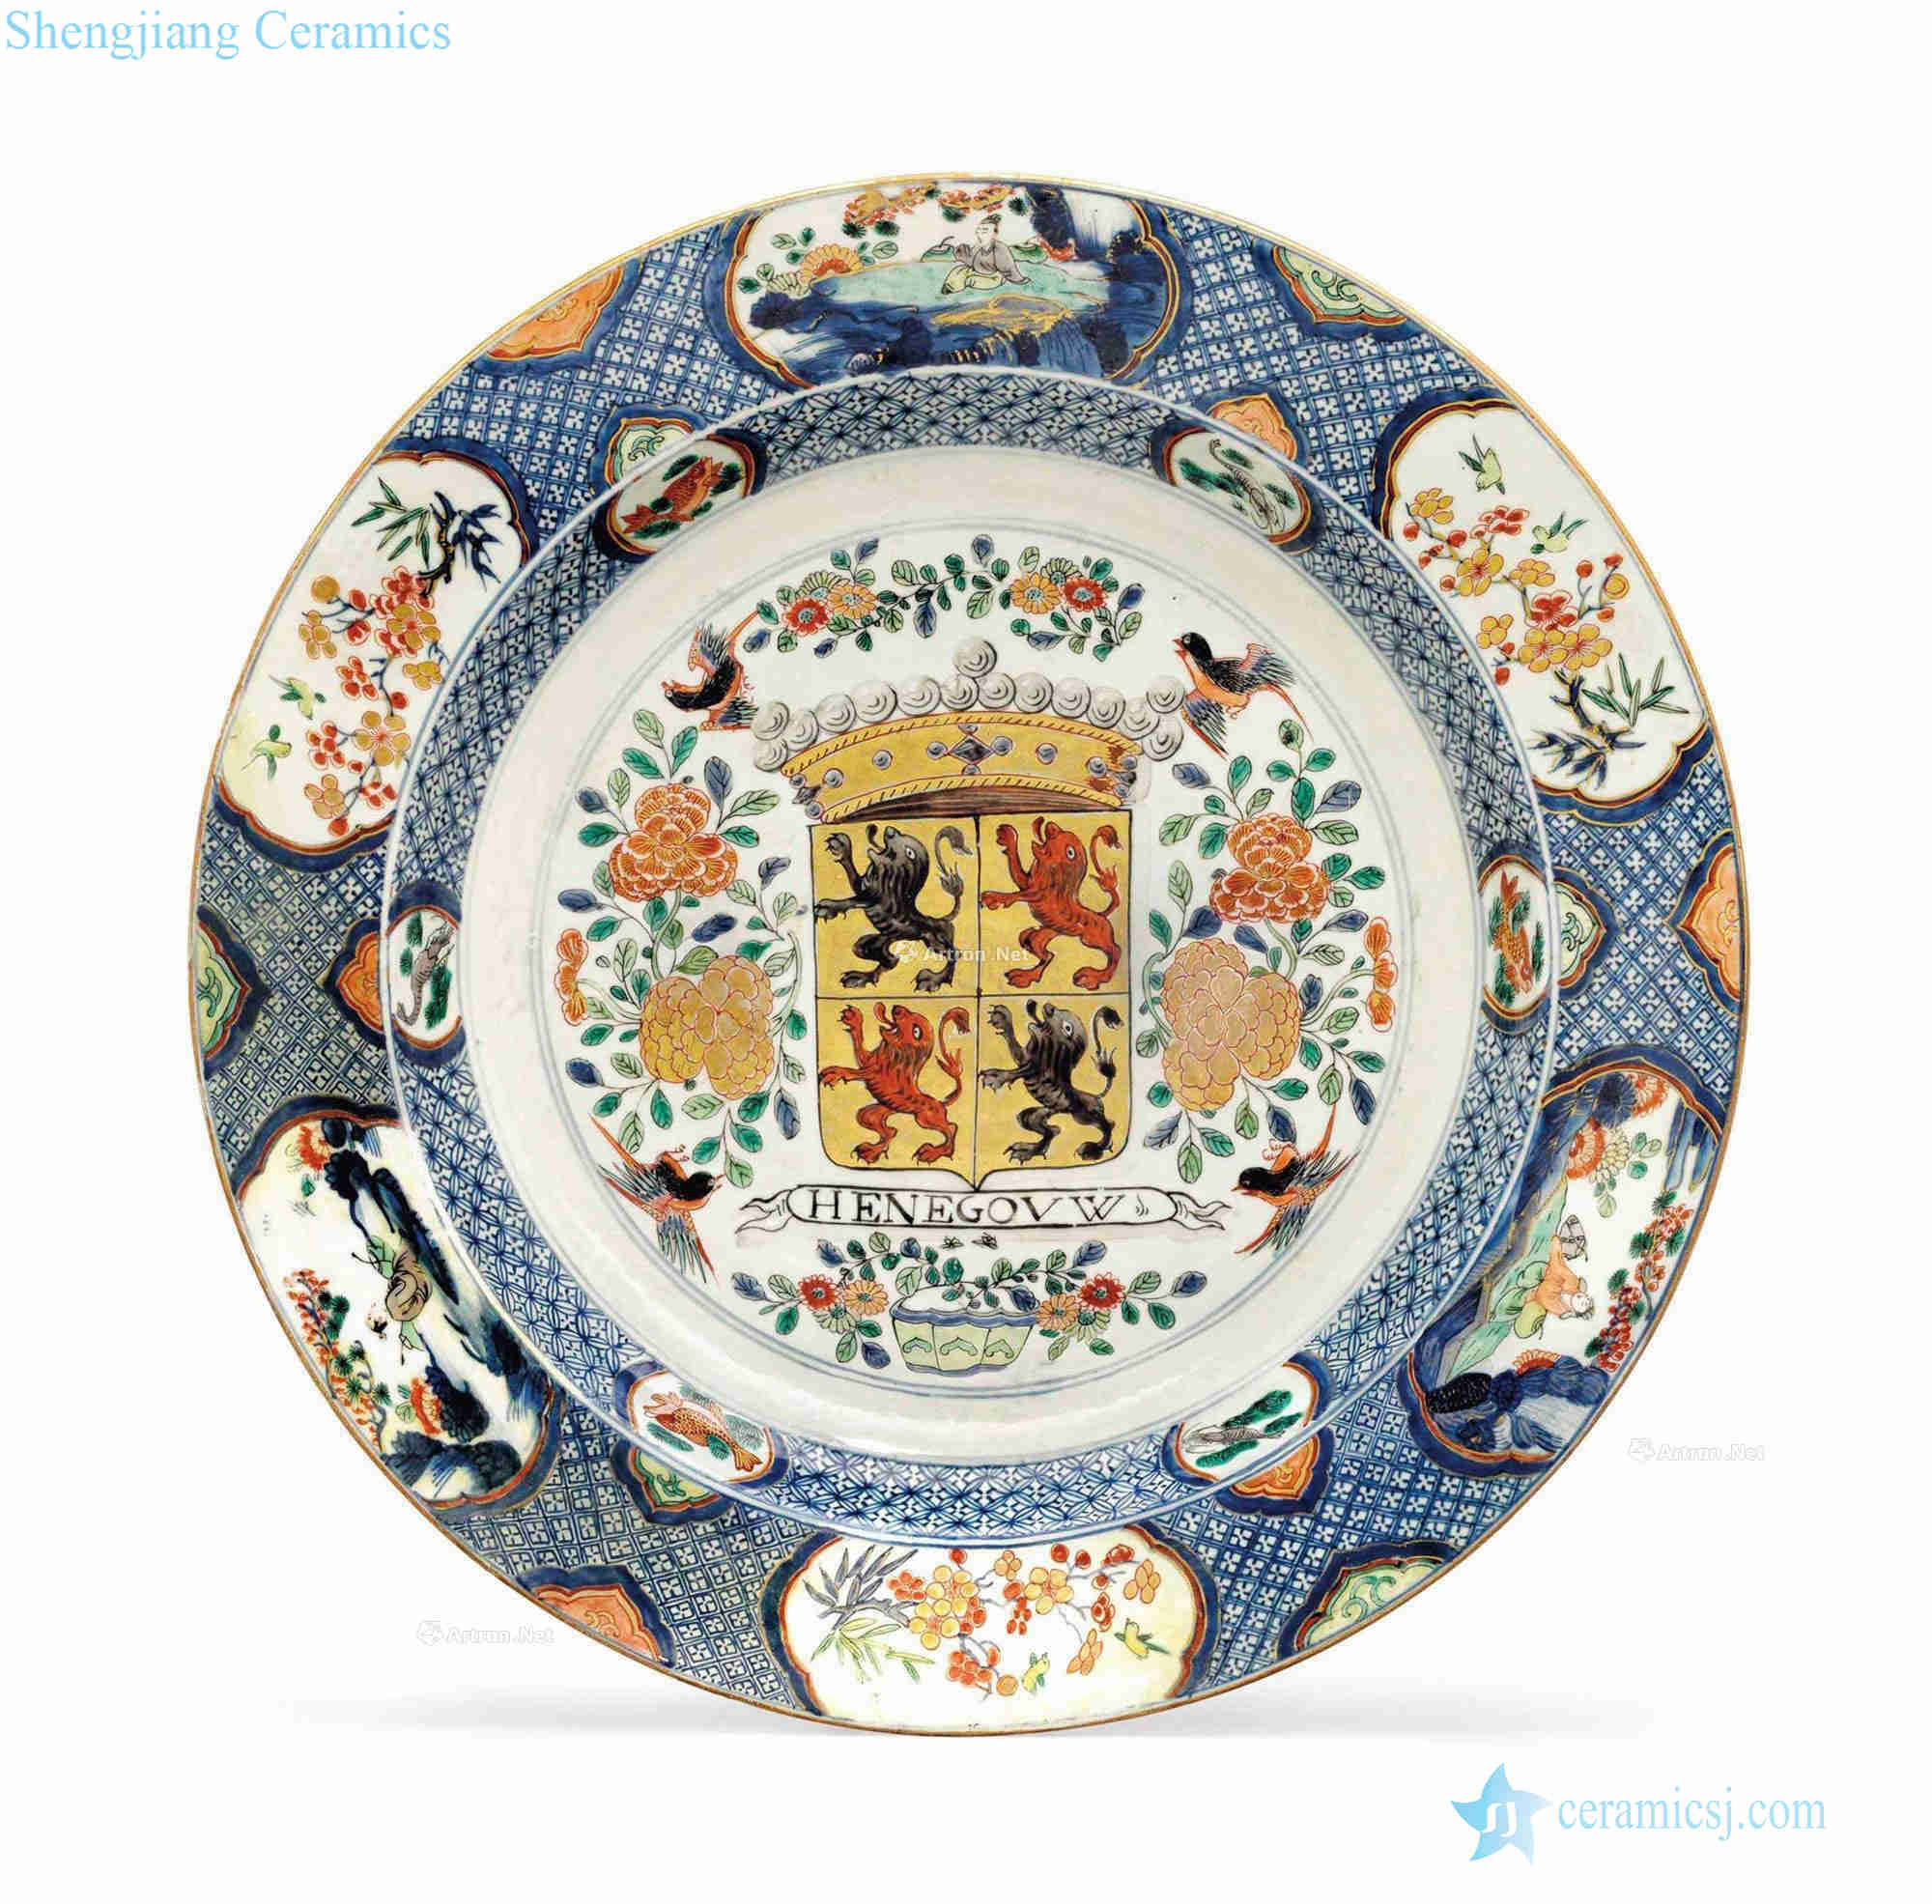 Kangxi period, about 1720 years. A VERY LARGE FAMILLE VERTE PROVINCE DISH